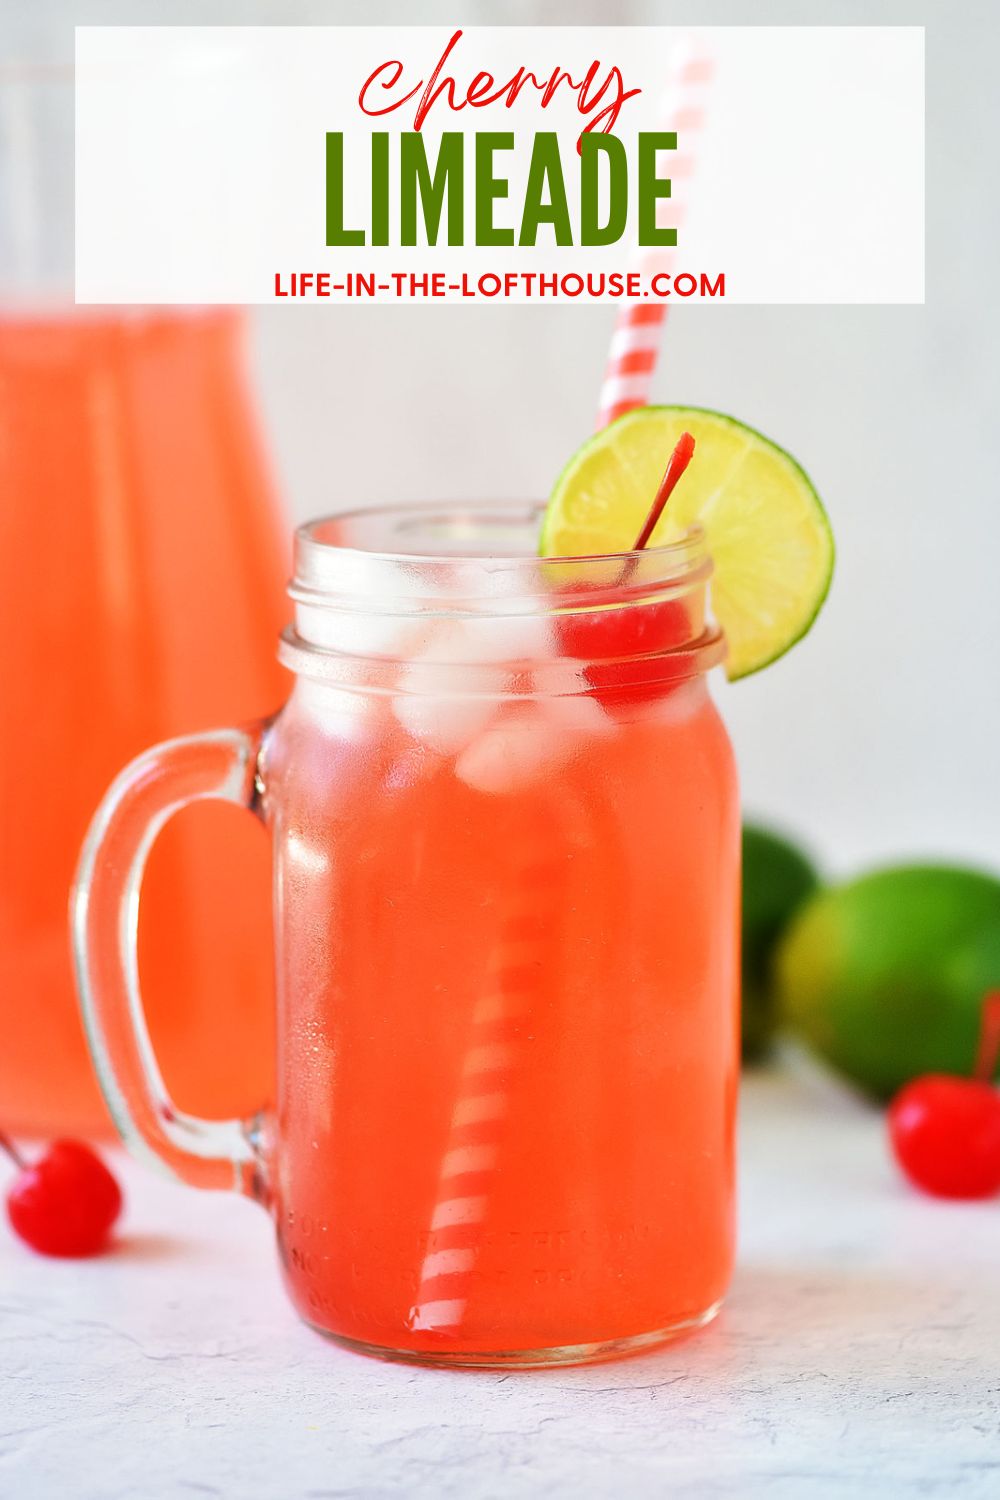 Cherry Limeade is the perfect summer time drink with a combination of frozen limeade, maraschino cherry juice and lemon-lime soda. Life-in-the-Lofthouse.com